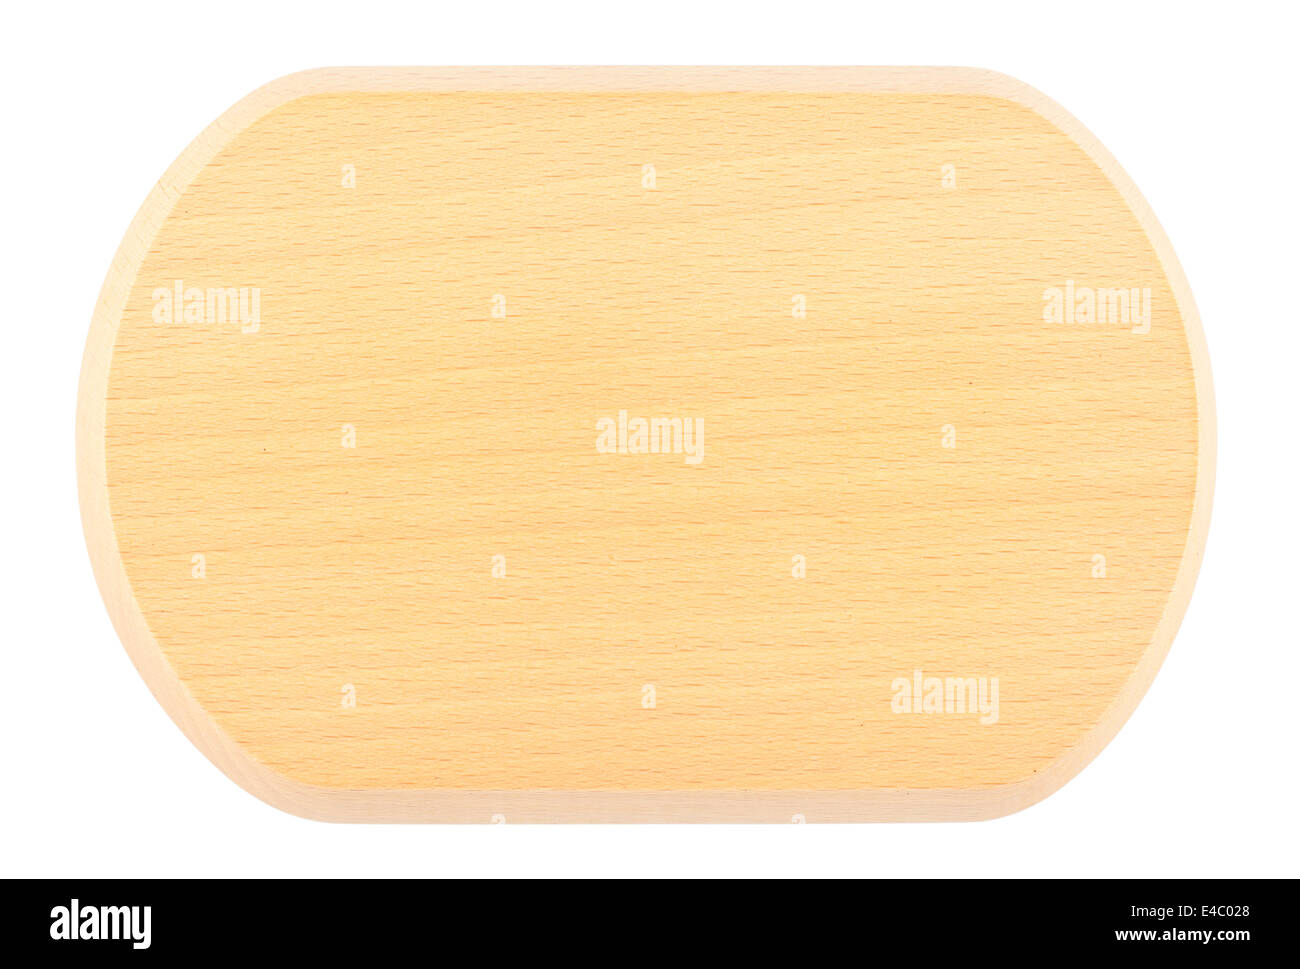 Wooden board Stock Photo